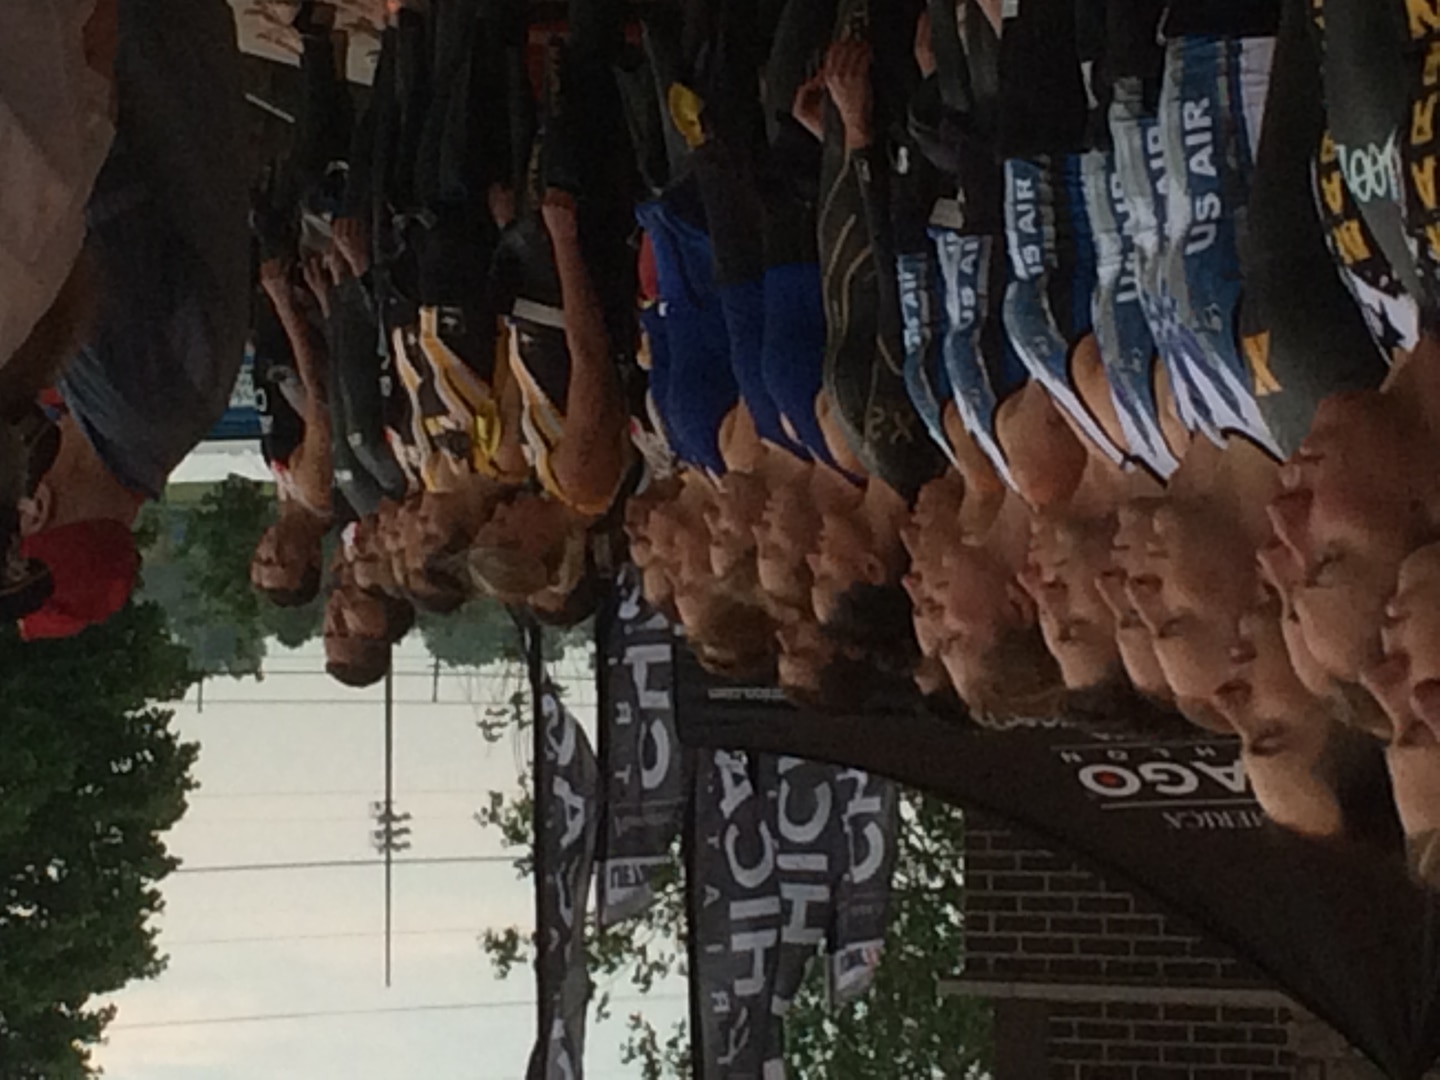 Service teams line up for the singing of the National Anthem during the 2015 Armed Forces Triathlon Championship held in conjunction with Leon's Triathlon in Hammond, Ind. on June 7.